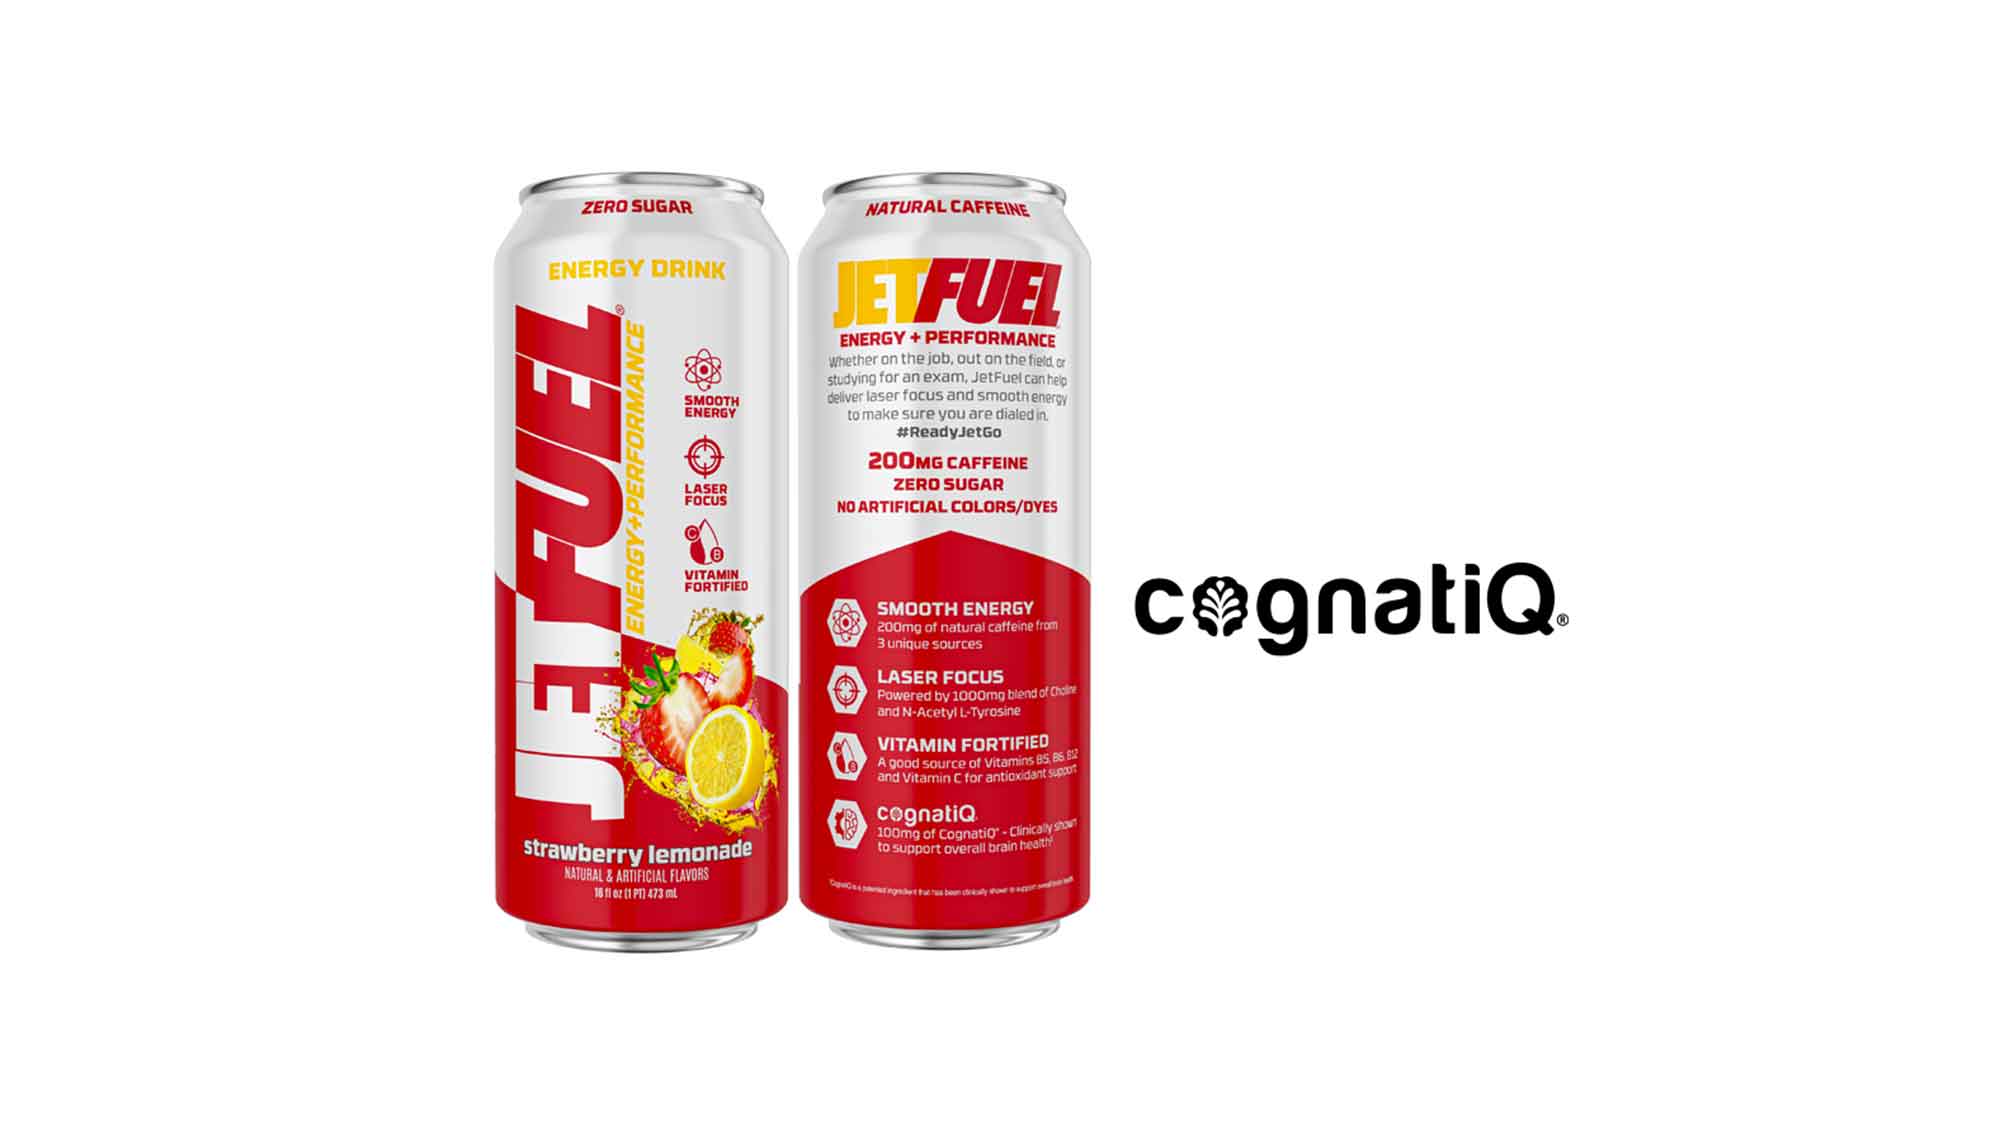 Jetfuel Energy RTD Redefines the Energy Drink Market With the Inclusion of CognatiQ